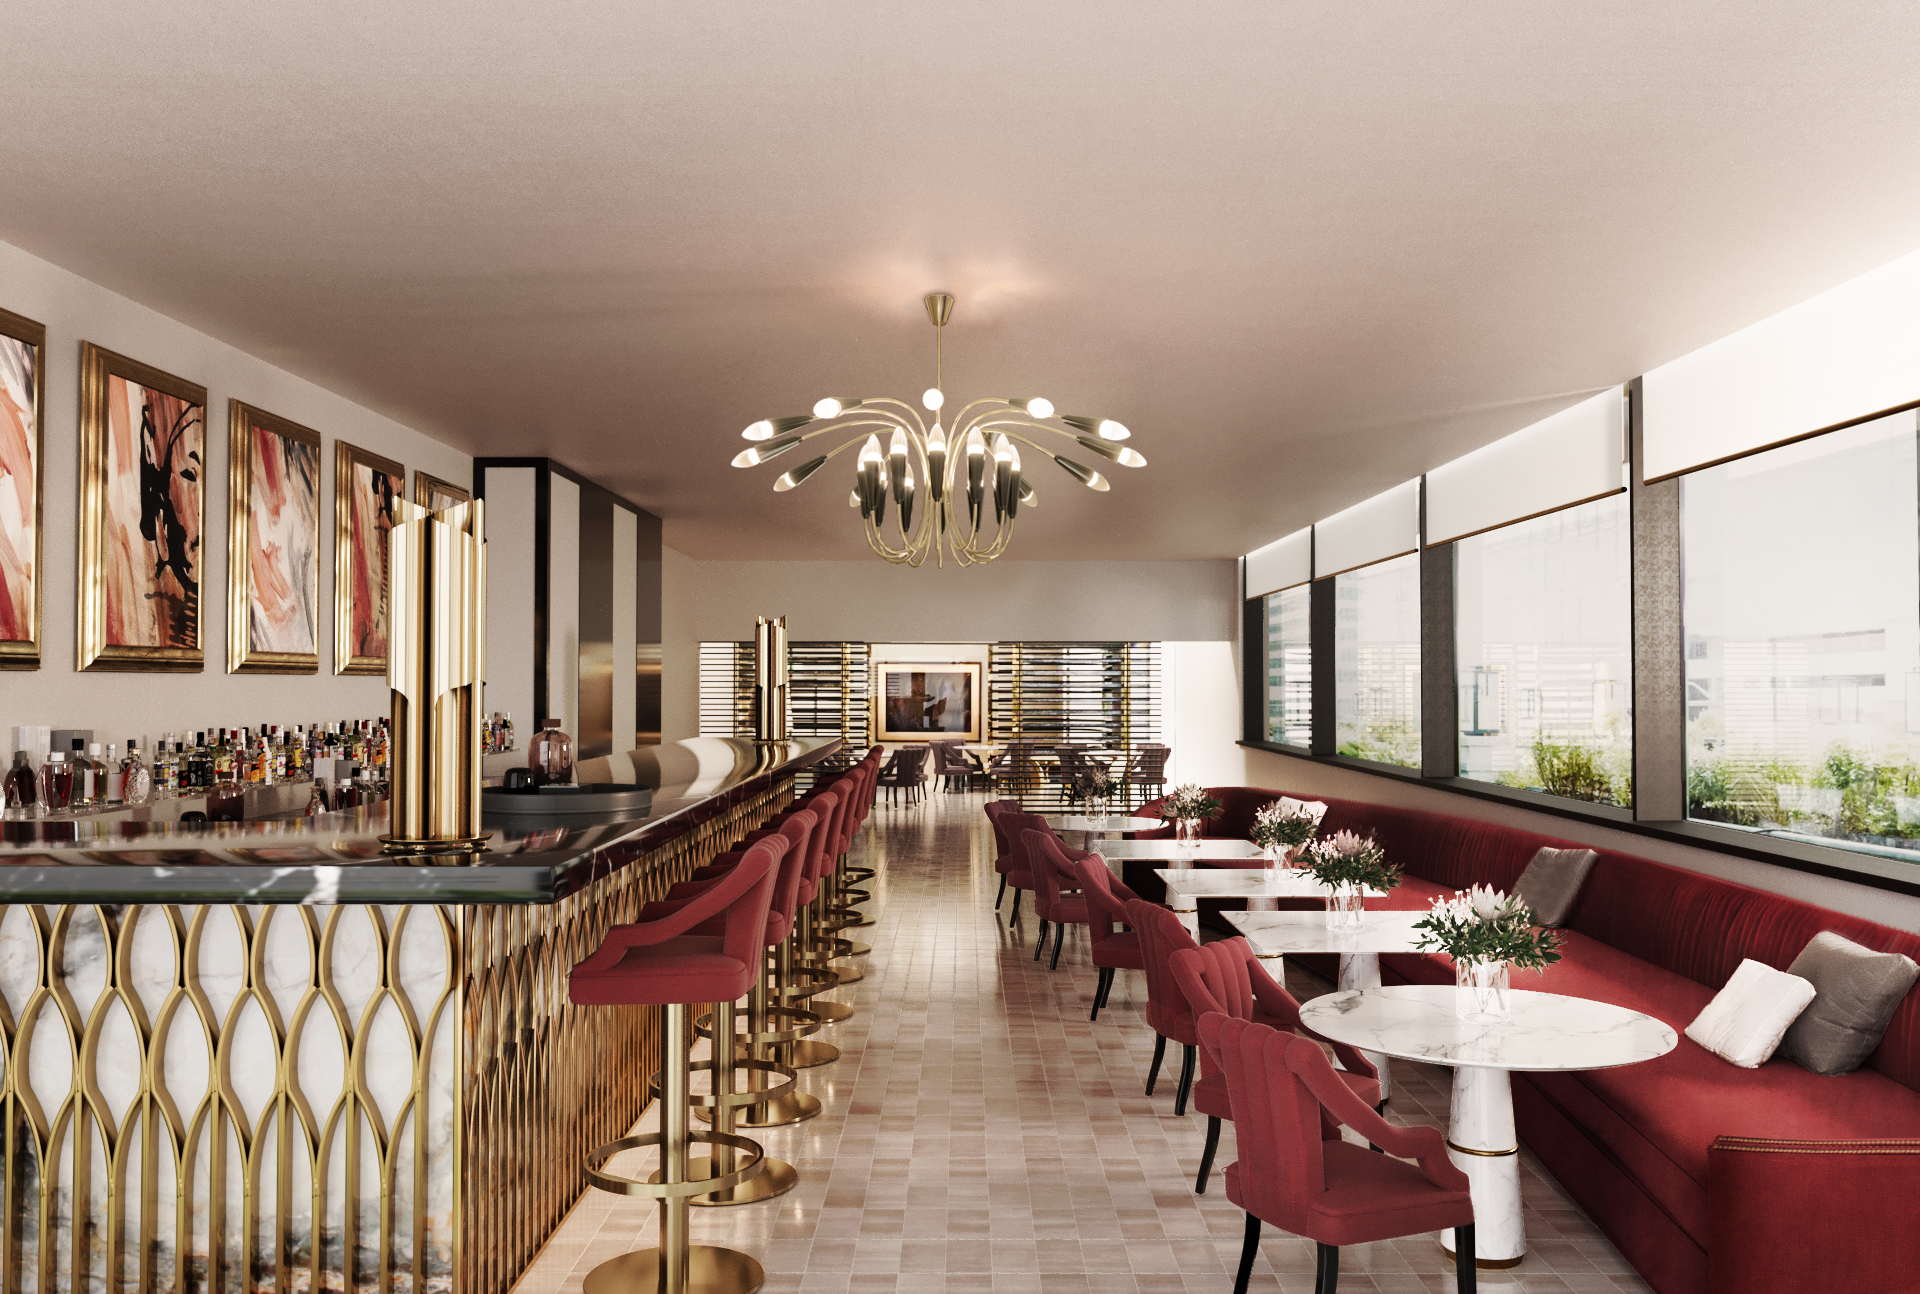 Restaurant Design with Red and Golden Details - Home'Society